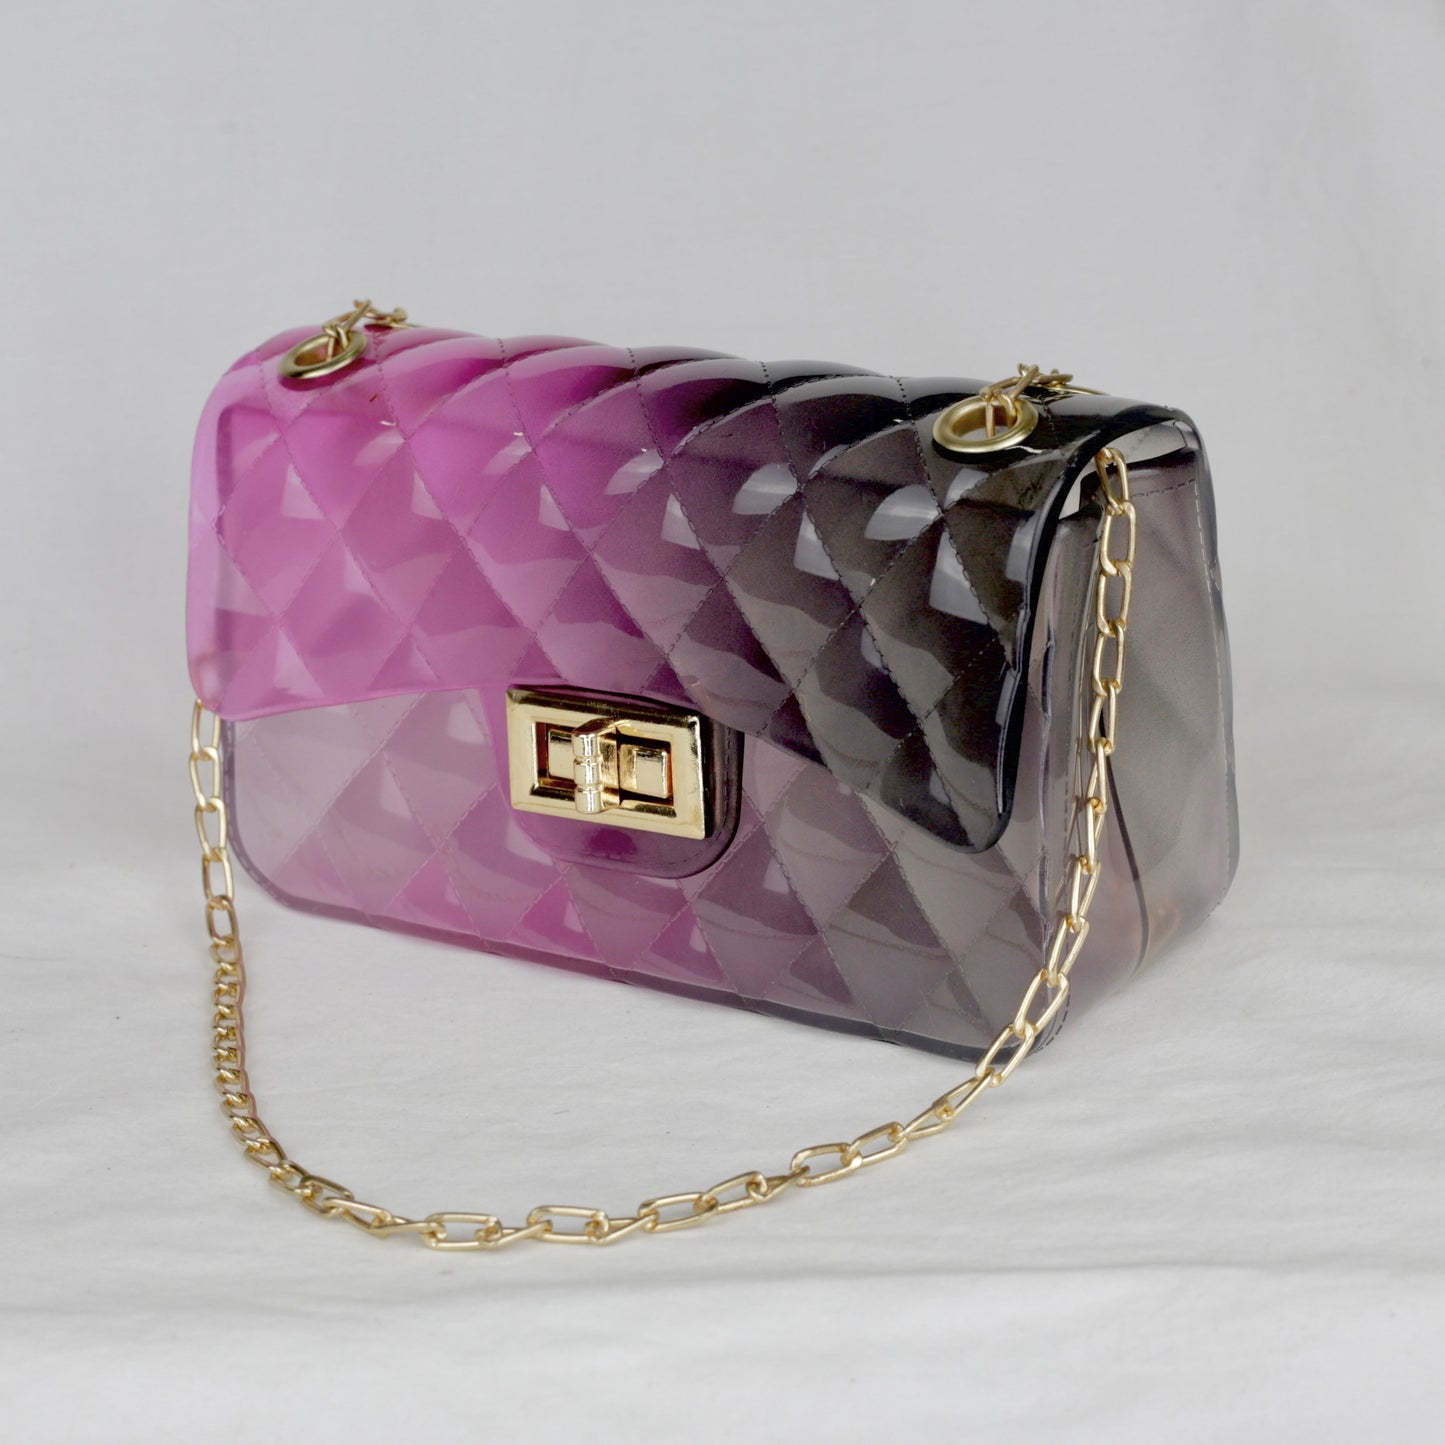 Ombré Jelly Sling Bag - The Accessorys Official